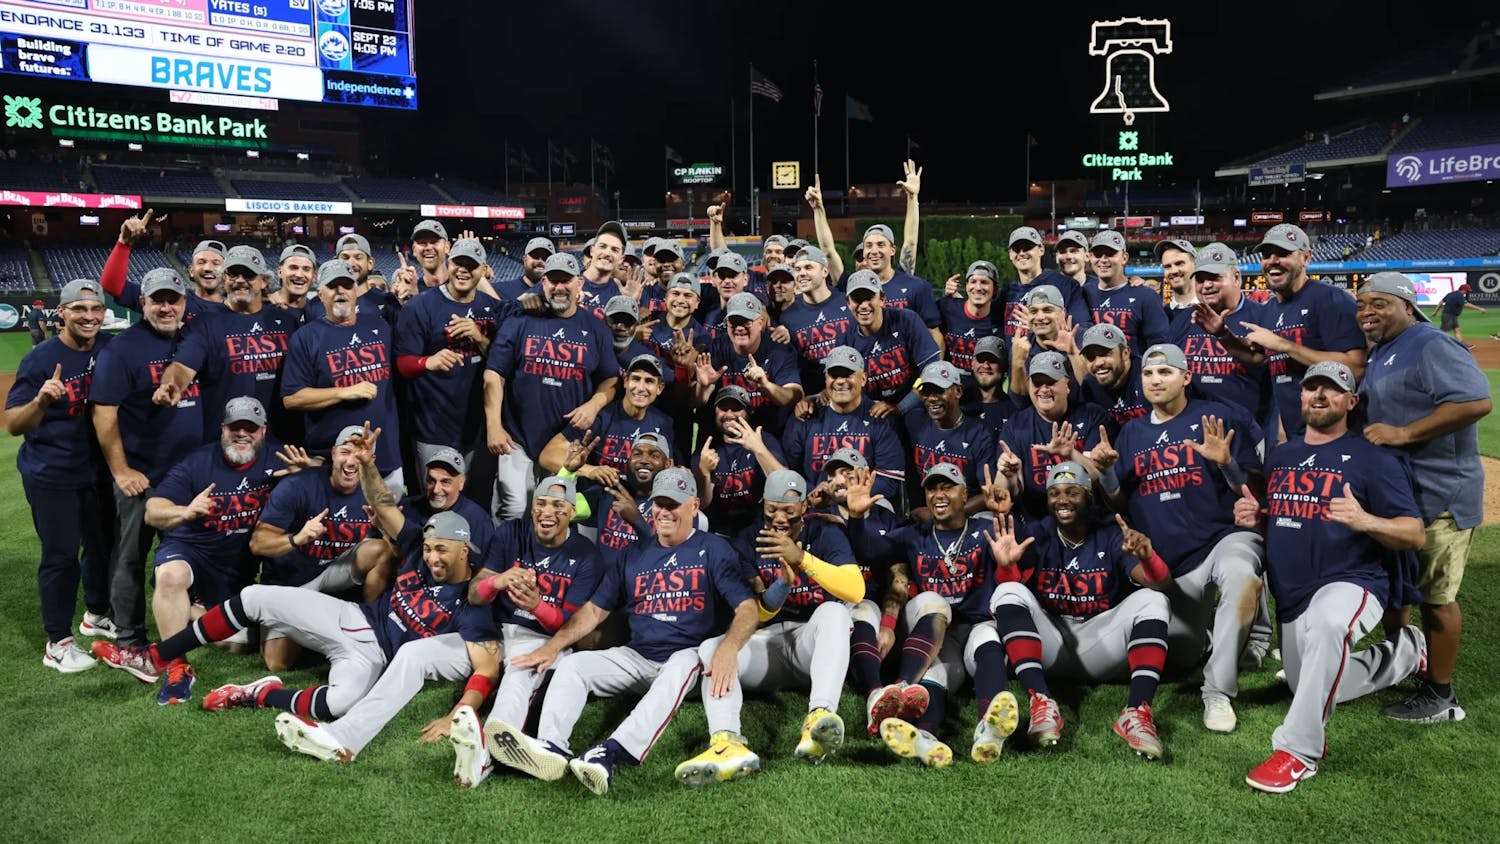 Braves win NL pennant, heading to 1st World Series in 22 years